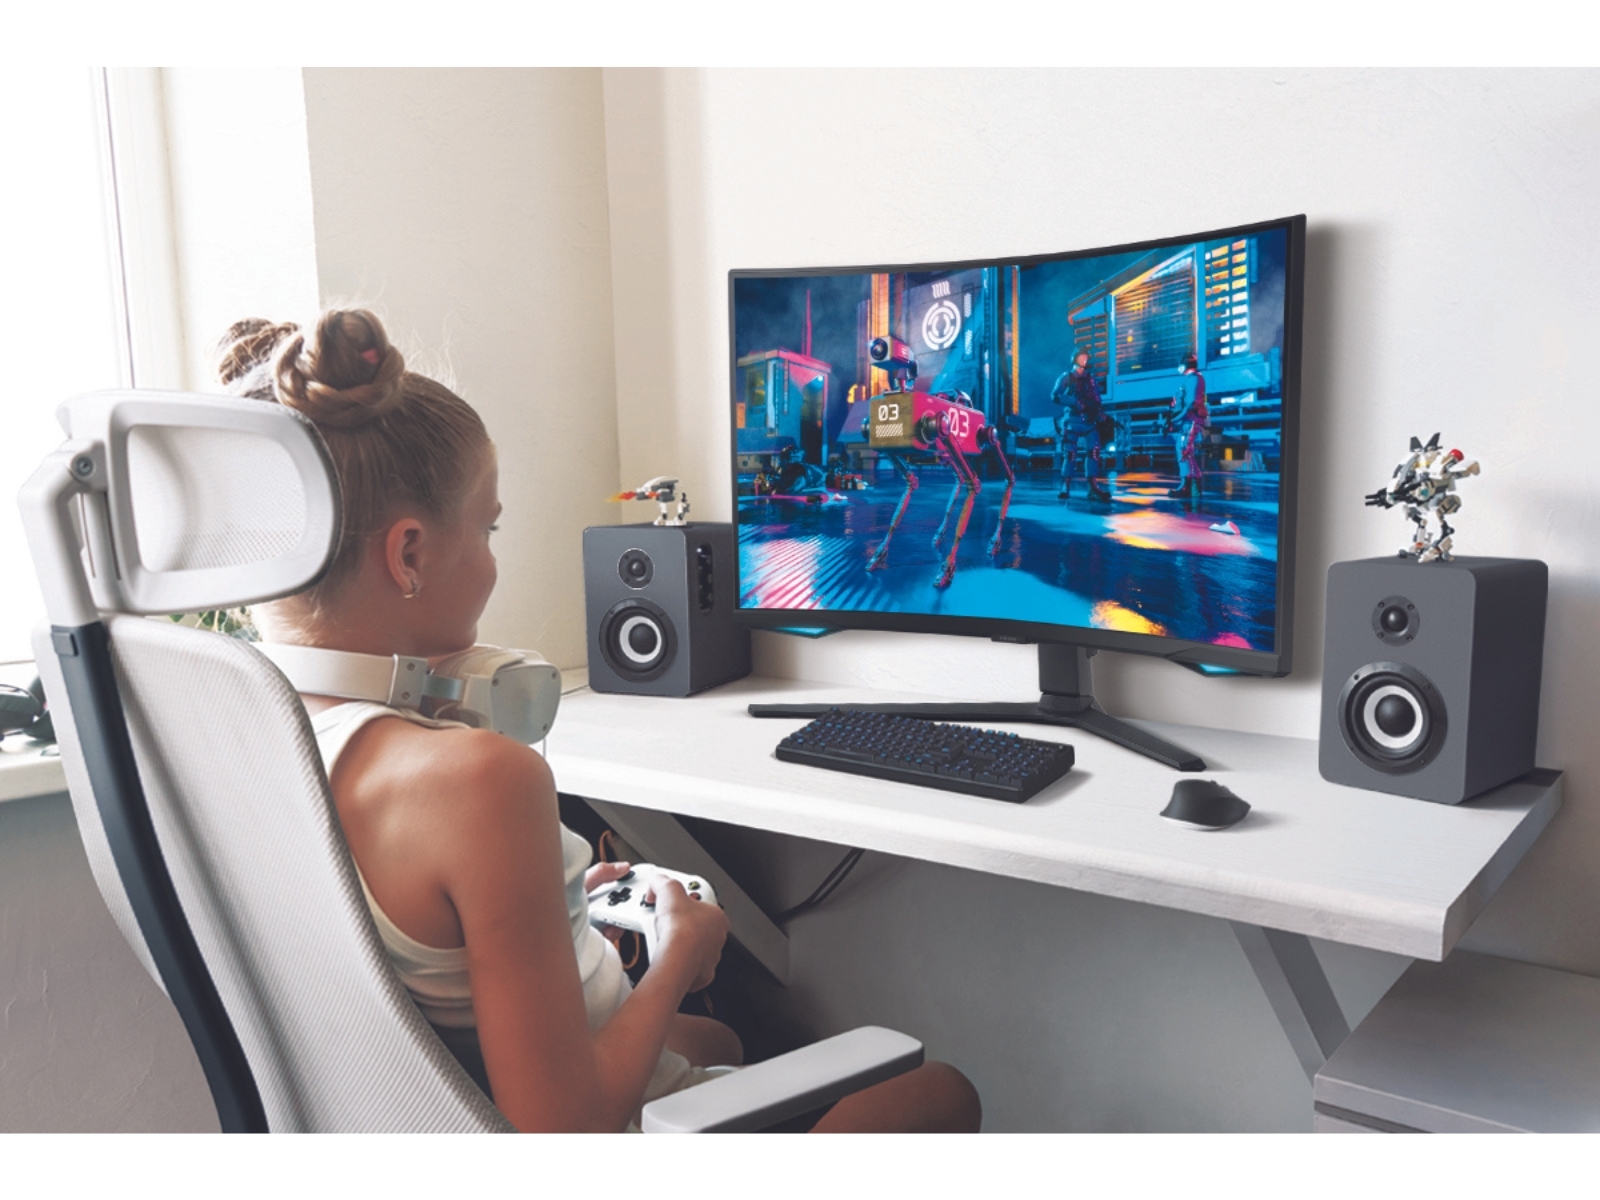 32 Odyssey Neo G7 4K UHD 165Hz 1ms(GTG) Quantum HDR2000 Curved